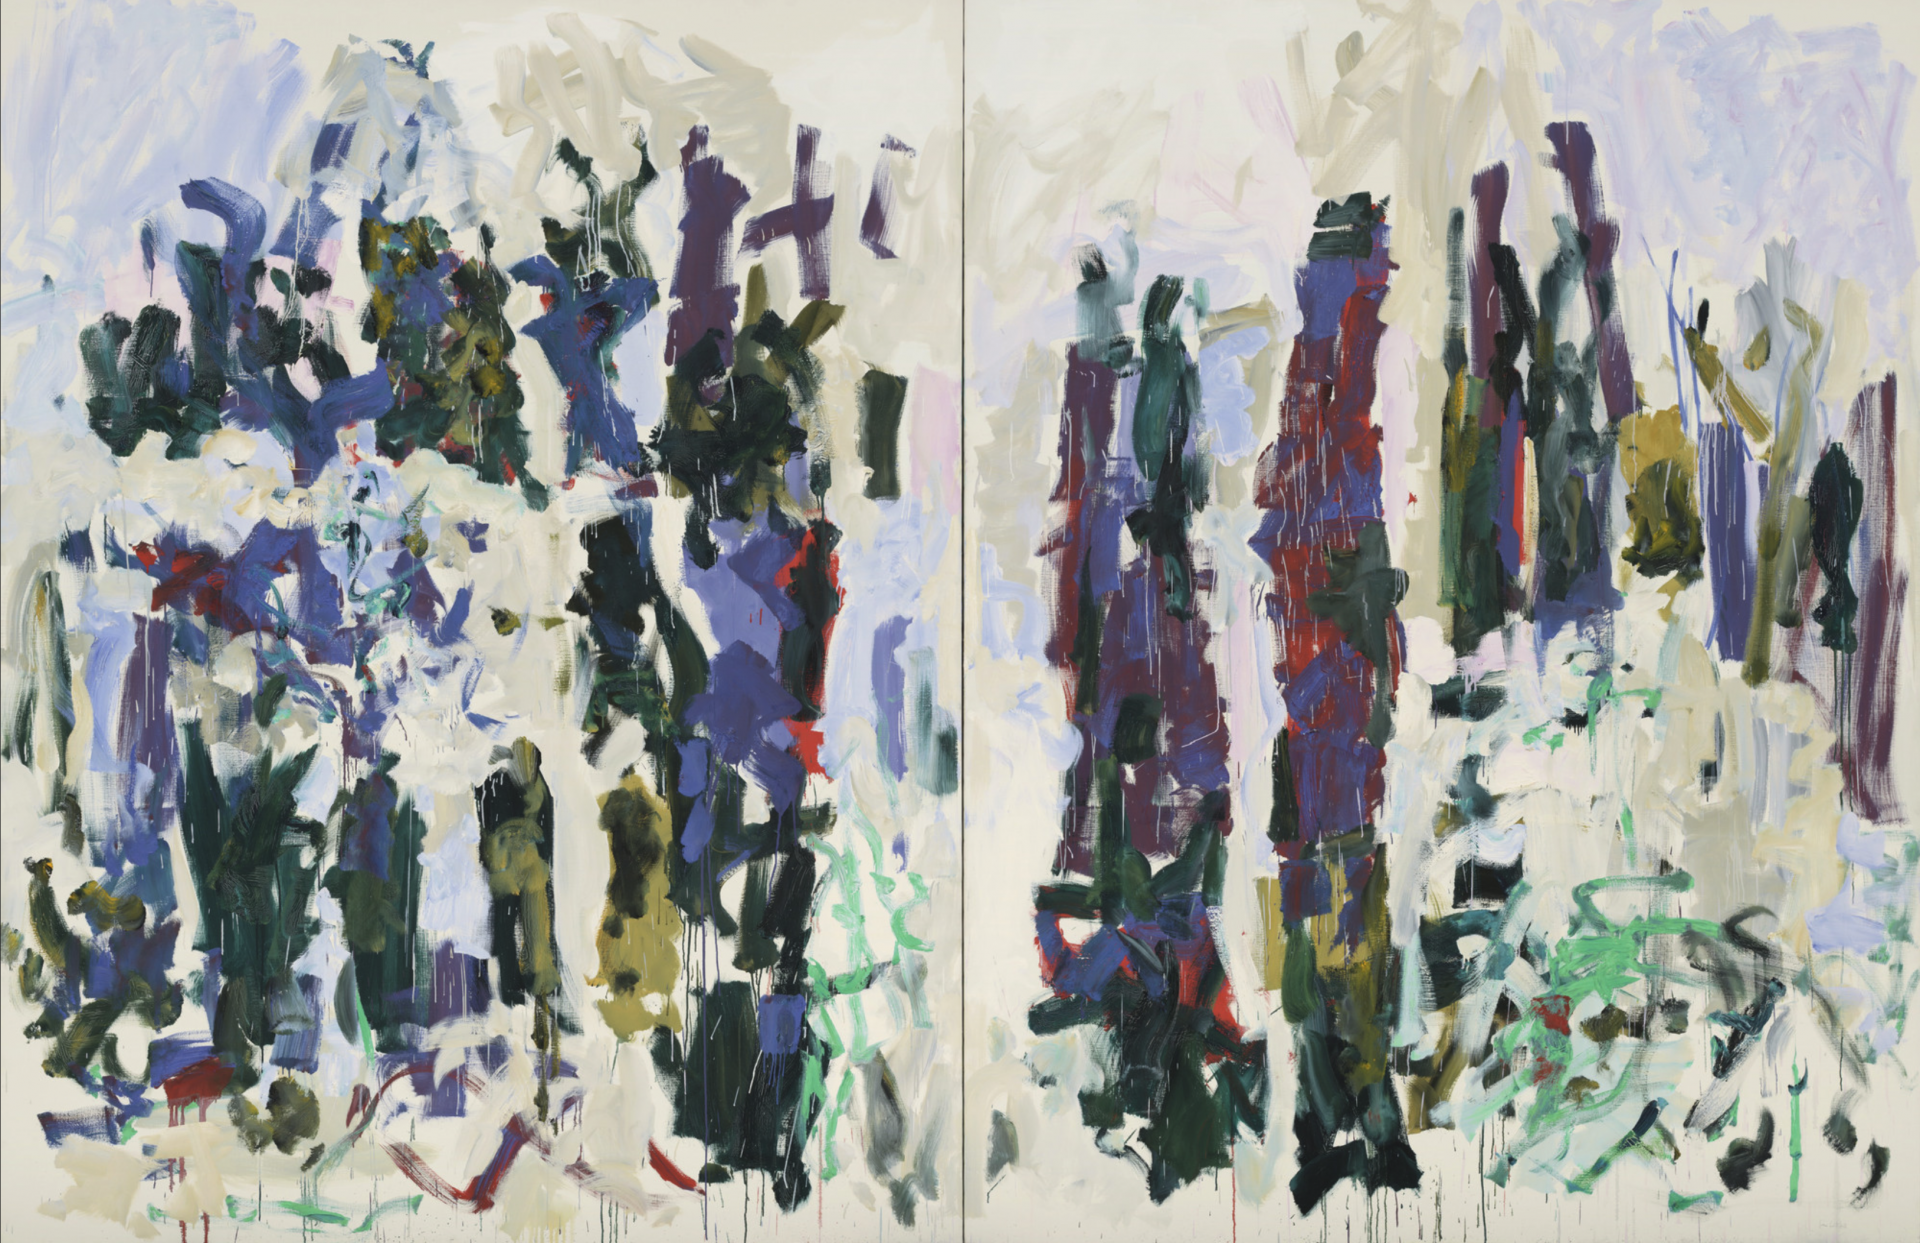 Abstract diptych by Joan Mitchell titled "Taillade" from 1990, featuring dynamic vertical brushstrokes in blues, greens, and reds on a white background, suggesting themes of growth and tension.